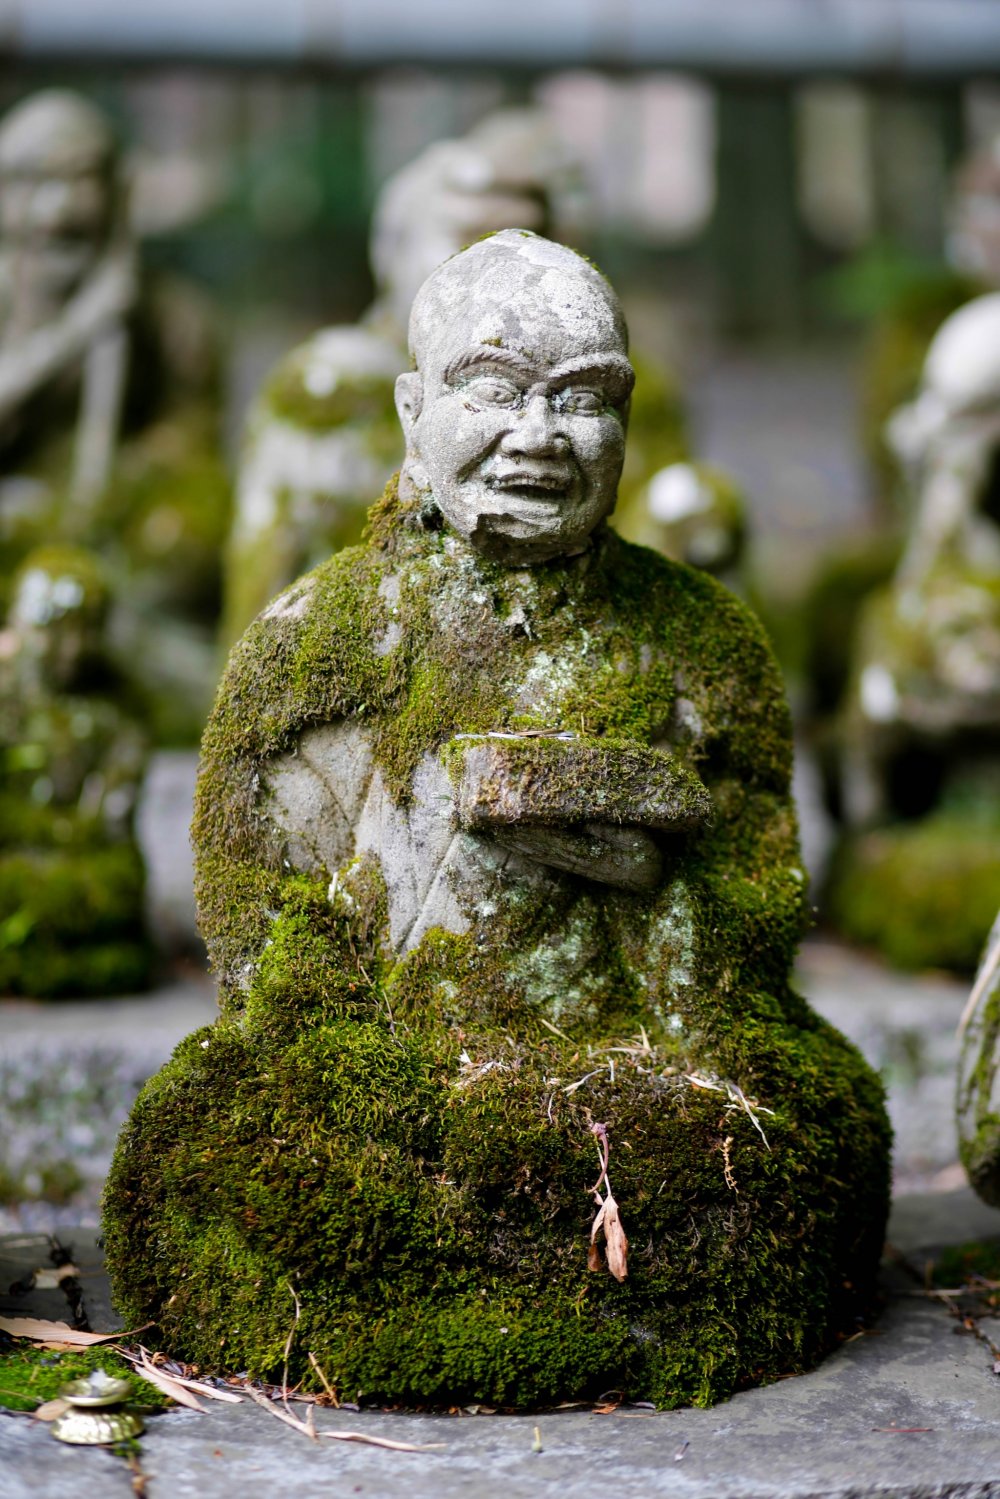 Moss covered old statues of Kannon